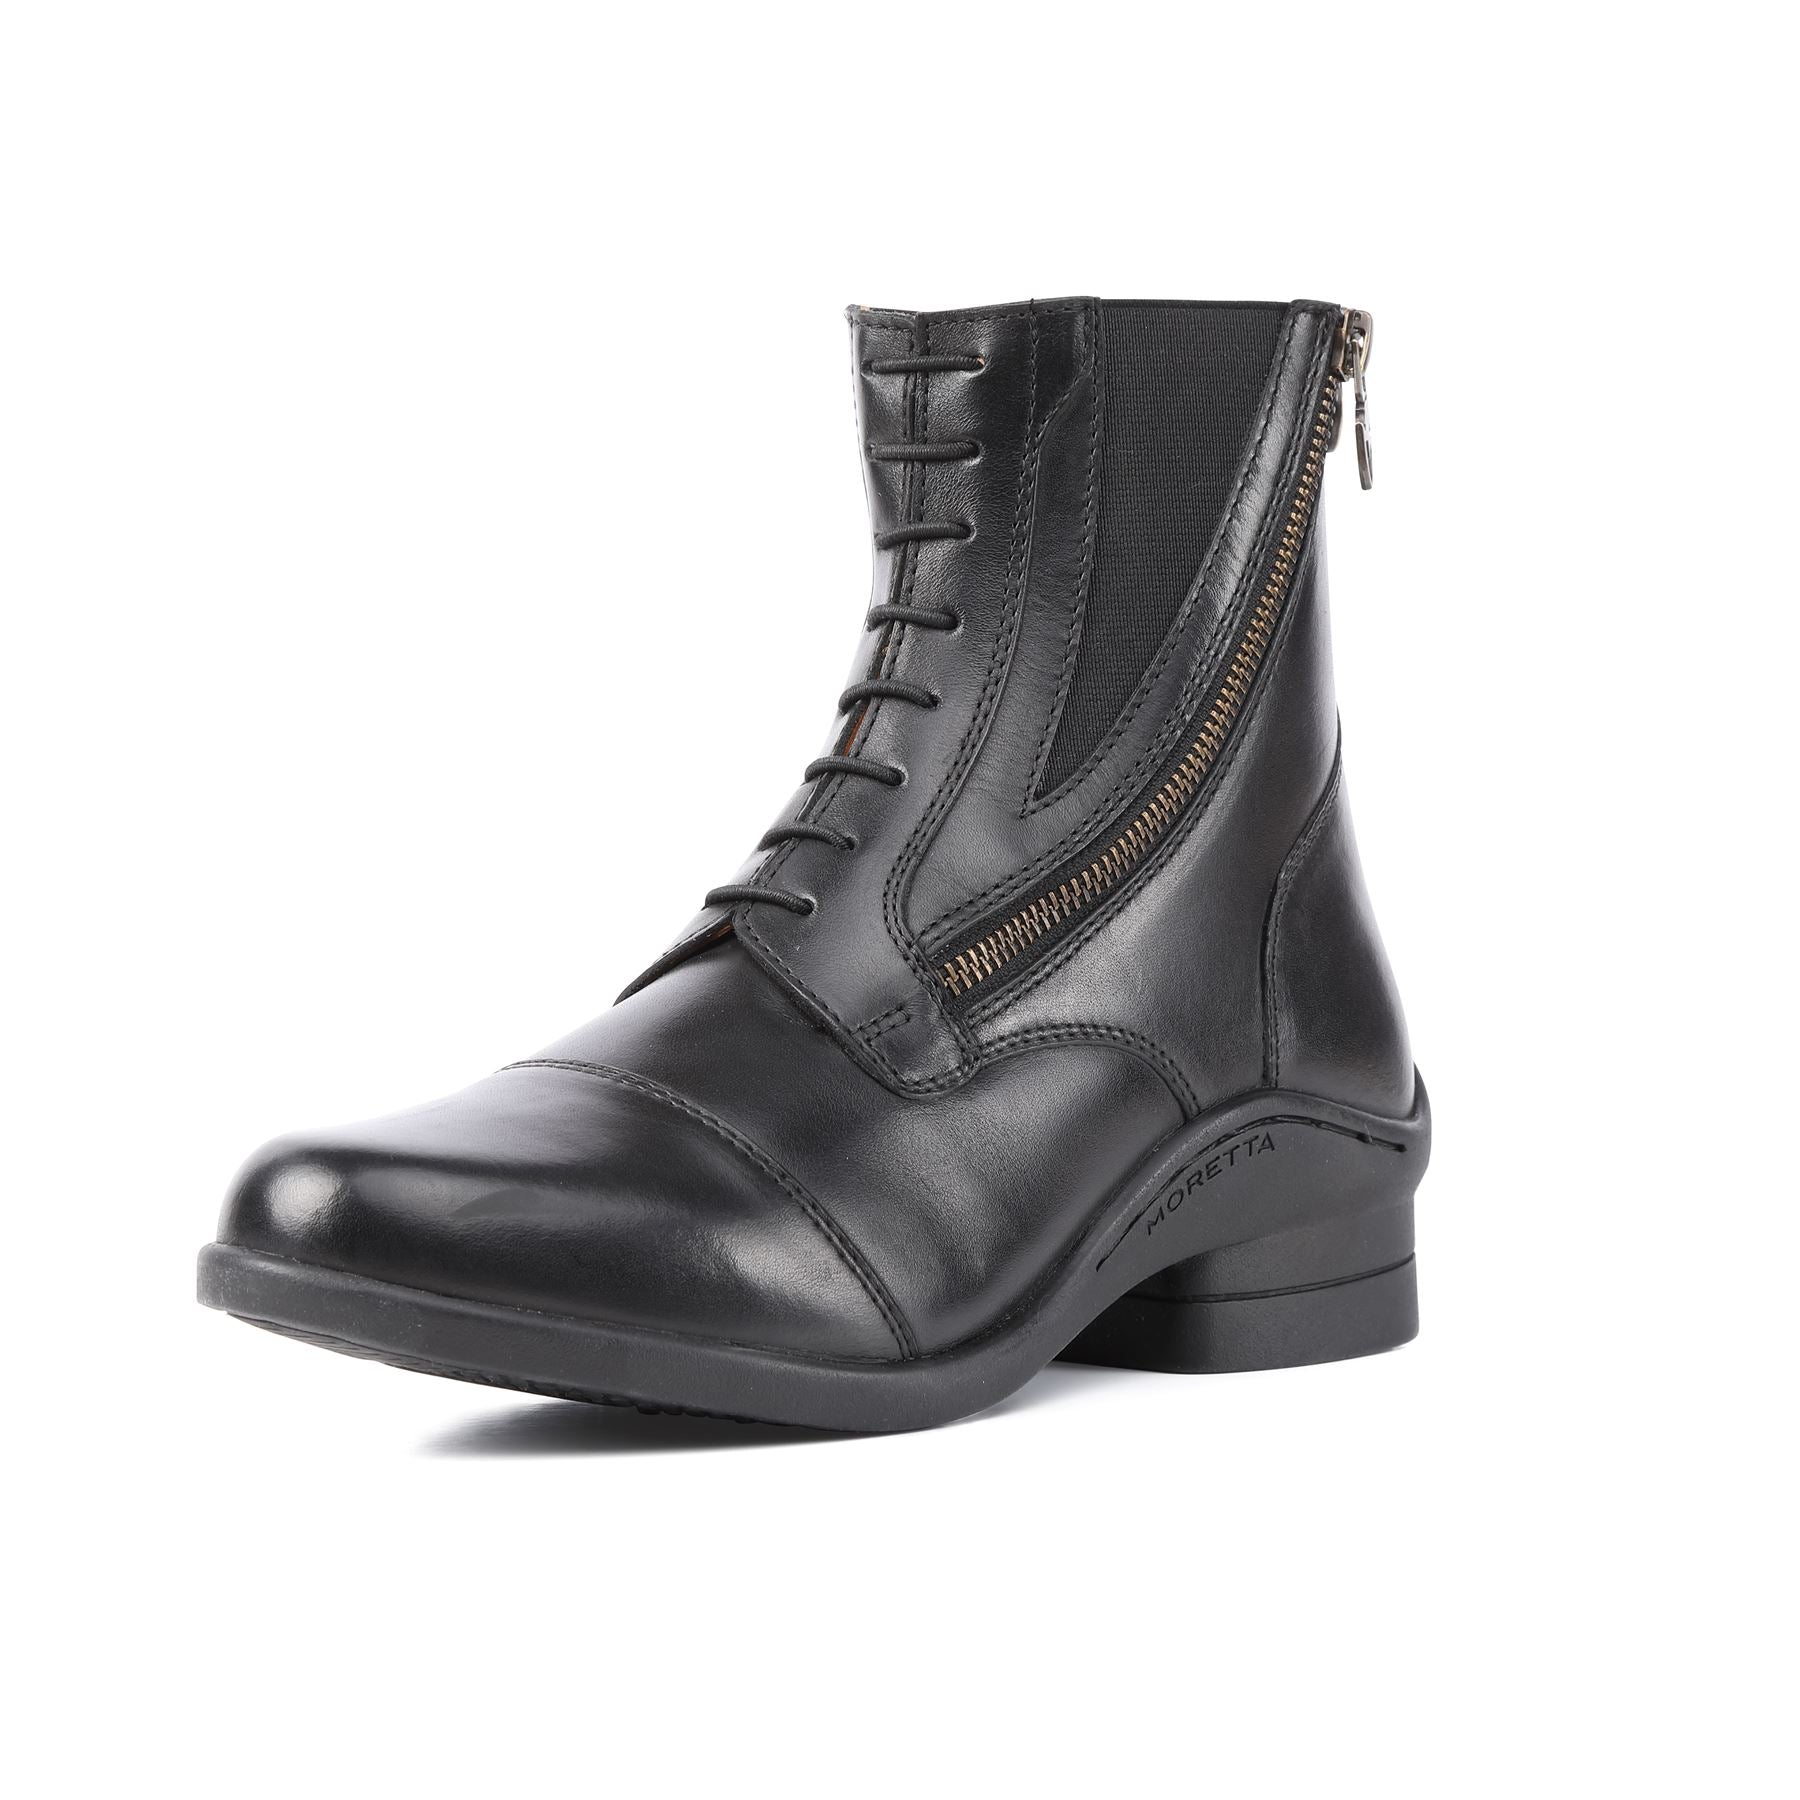 Moretta Alessia Leather Paddock Boots - Just Horse Riders